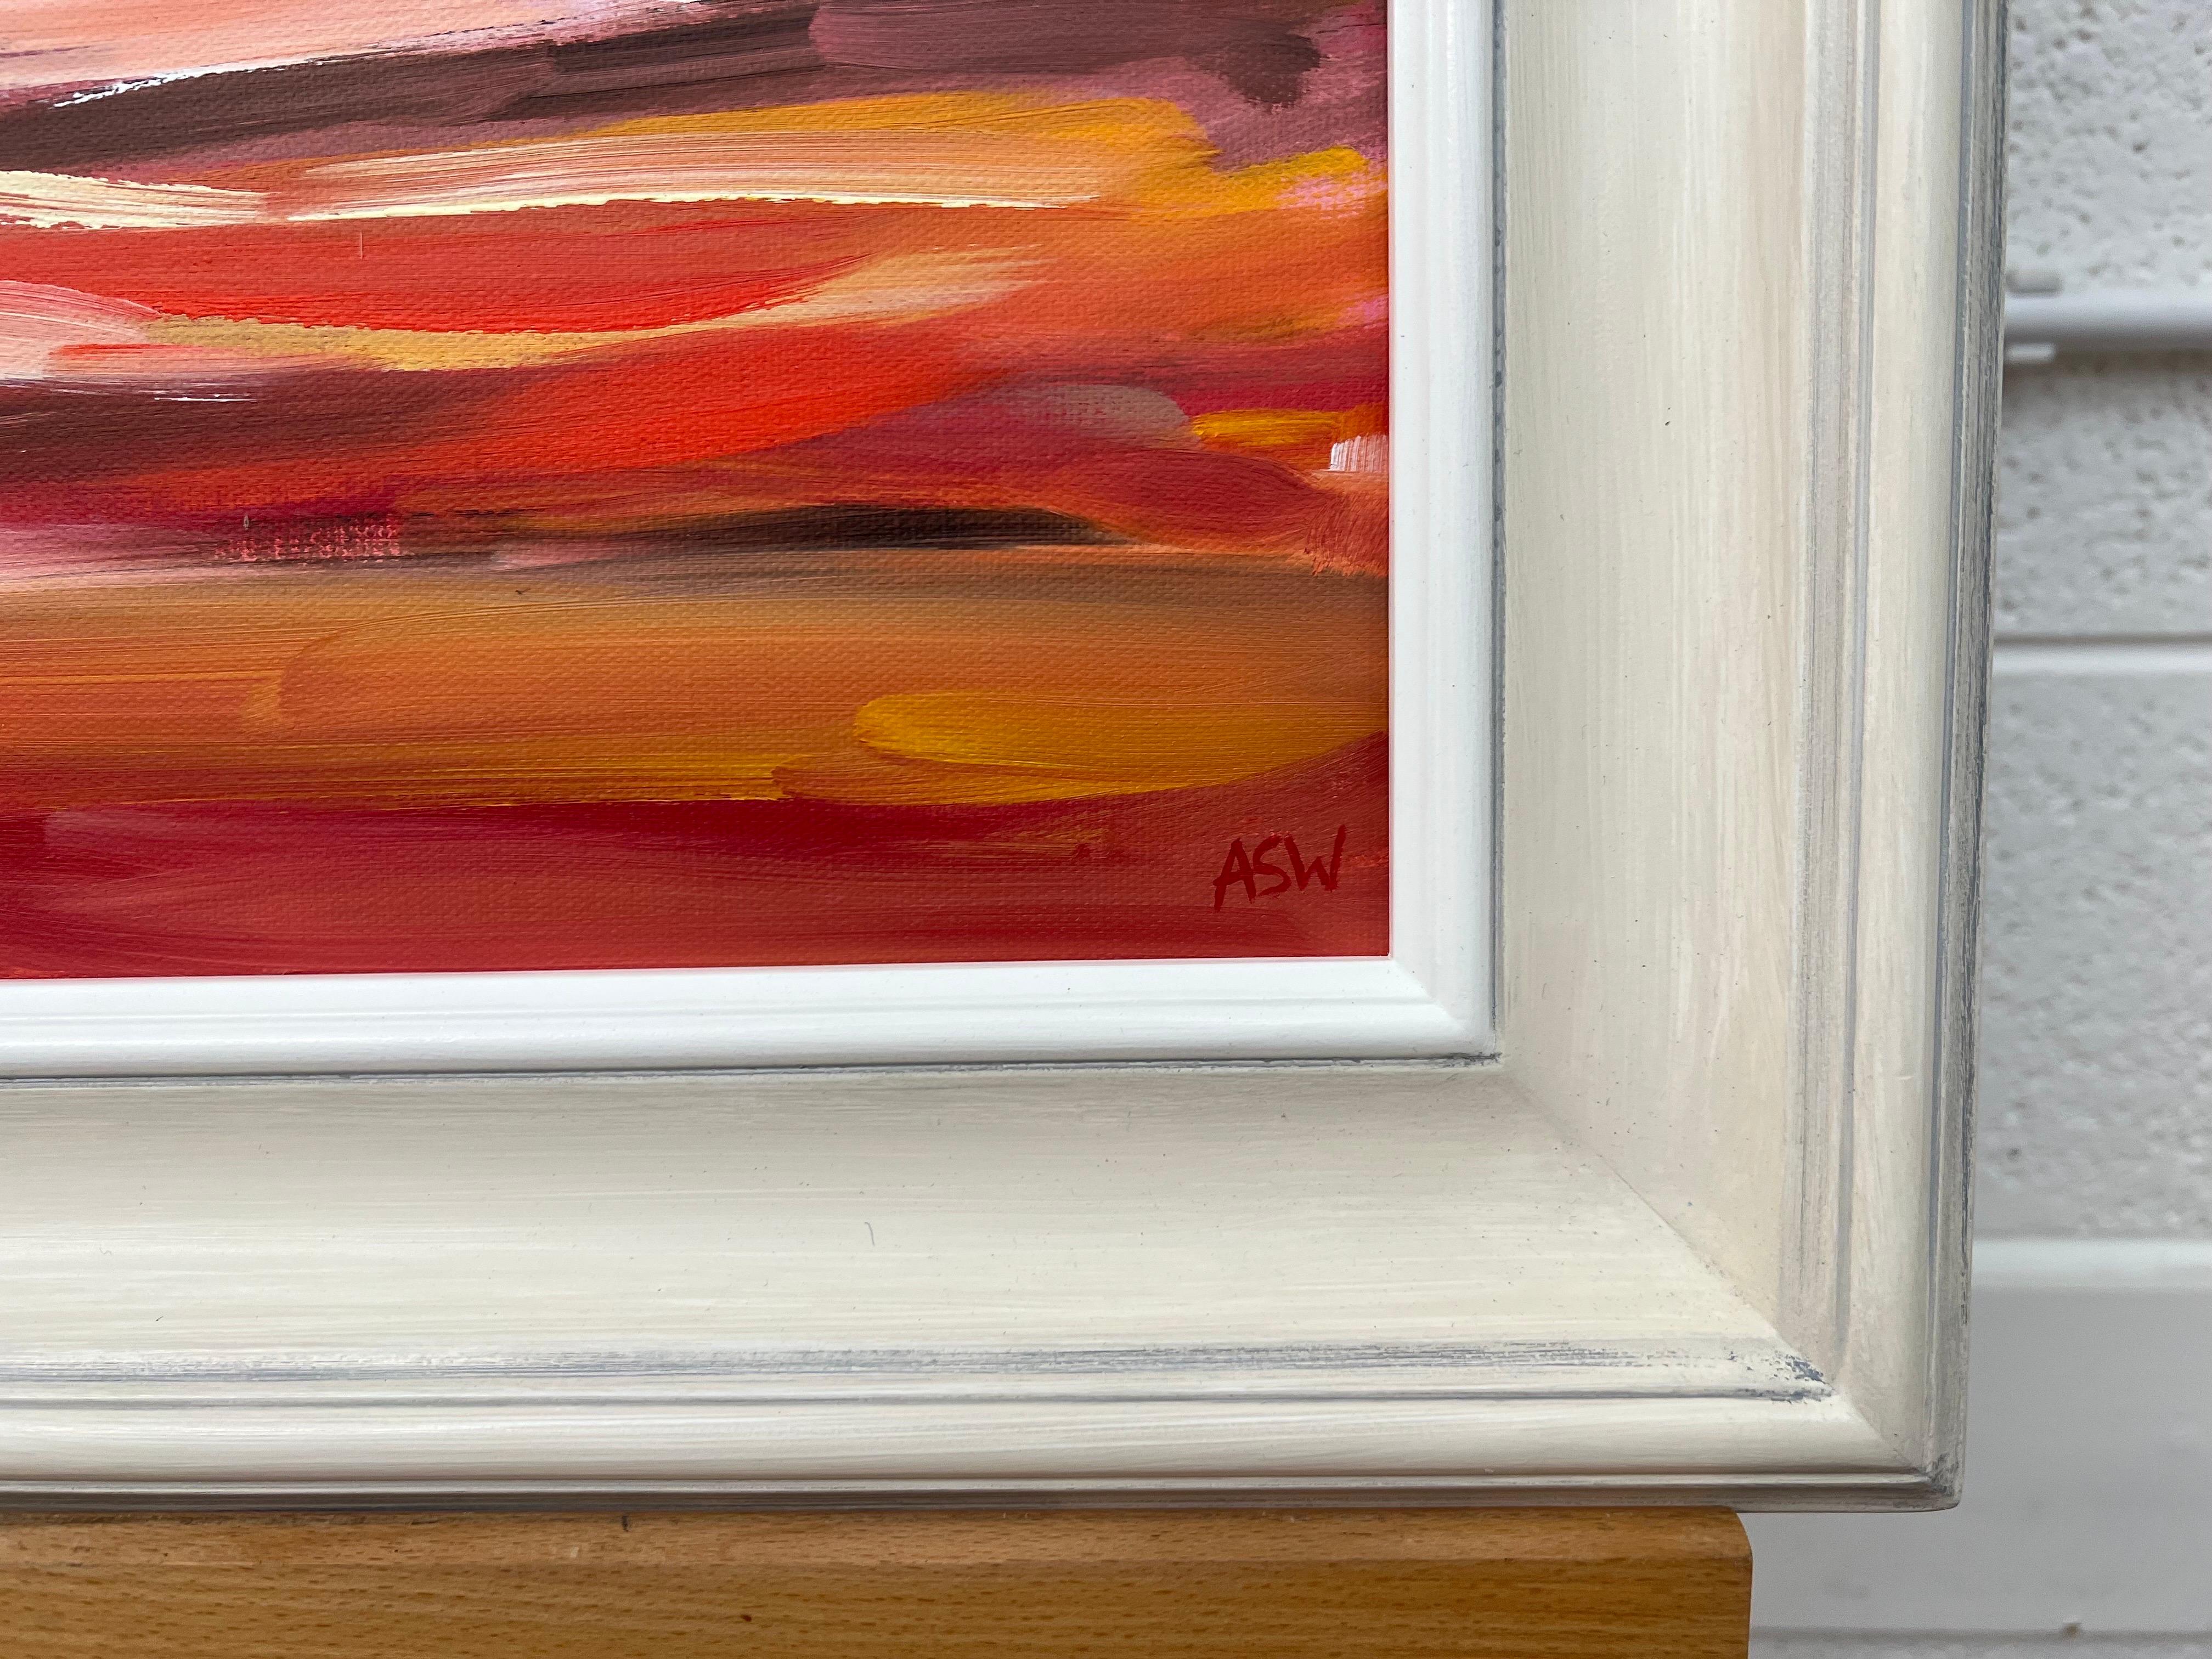 Red & Yellow Abstract Impressionist Seascape Landscape by Contemporary British Artist, Angela Wakefield. This atmospheric original painting depicts forms part of a new body of work based on human emotions, and explores the boundaries between